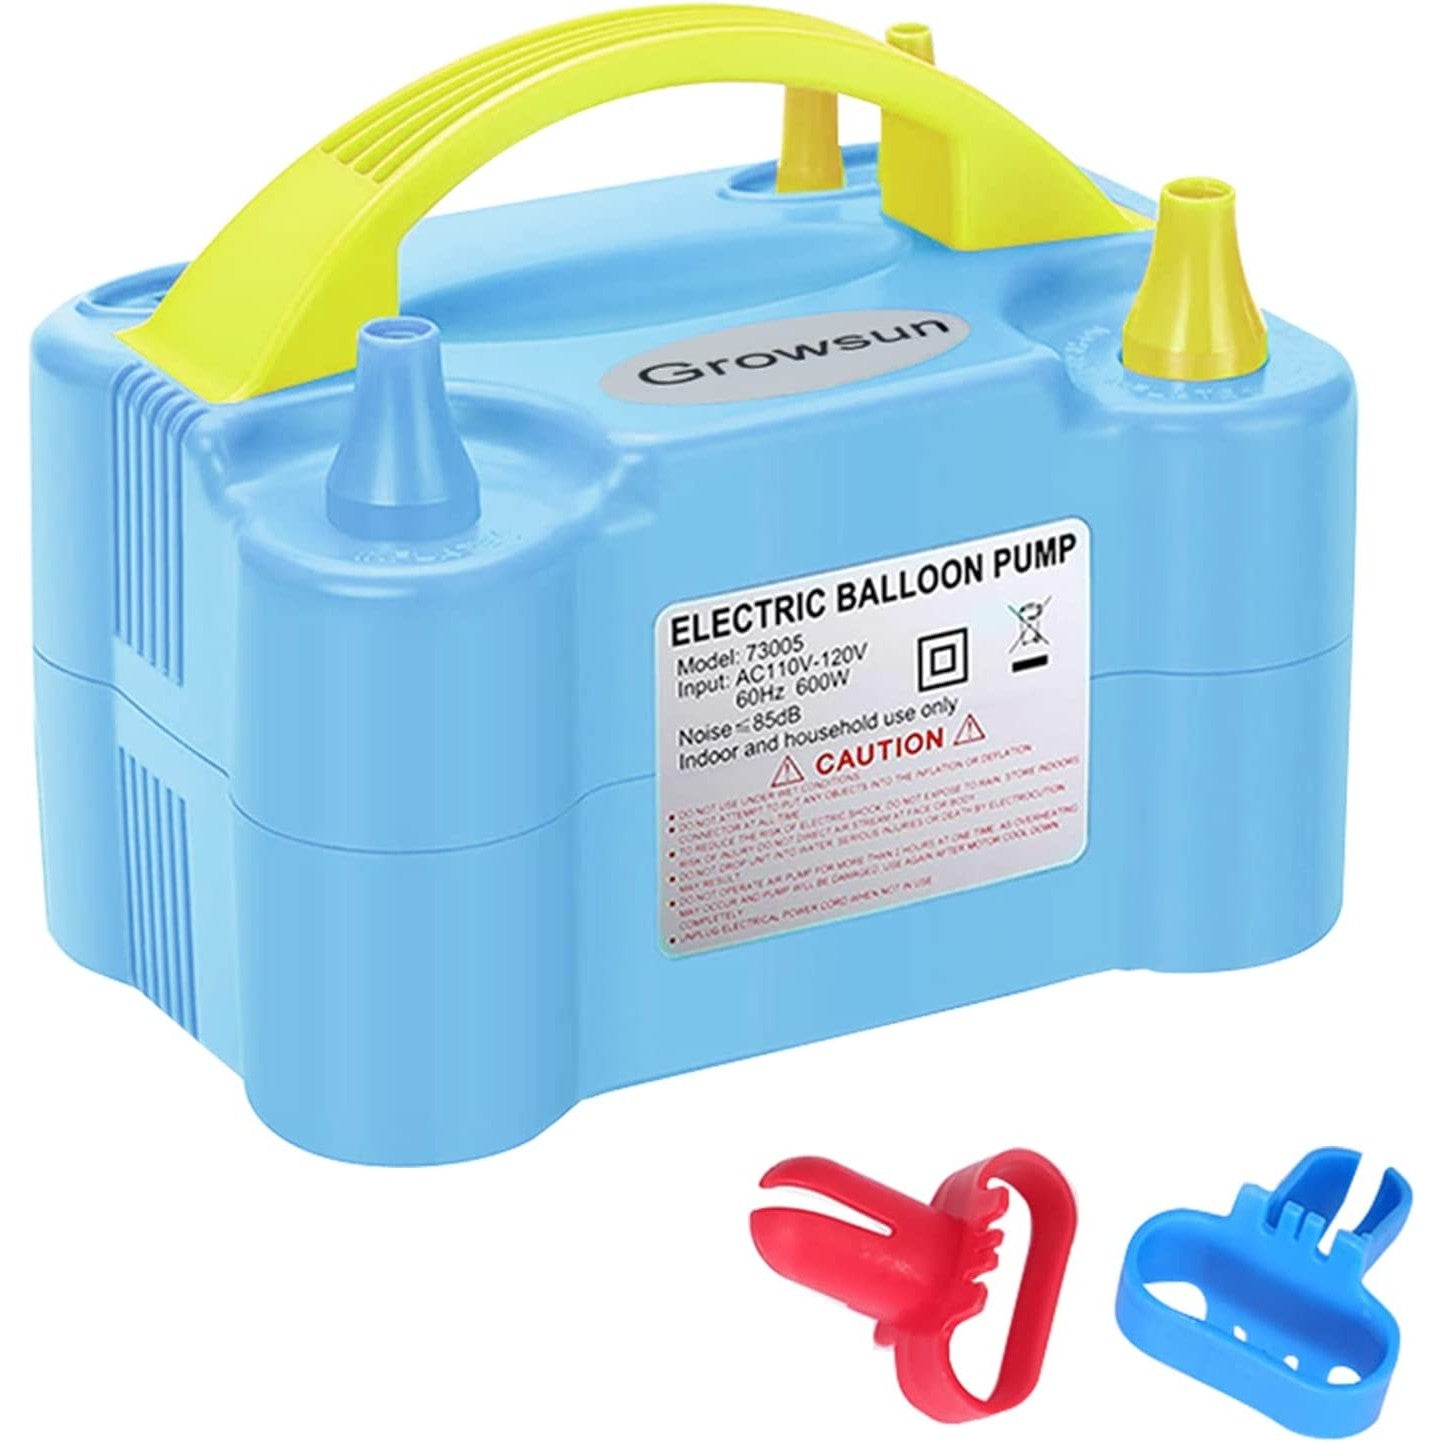 Make party planning easier with this handy electric air balloon pump. –